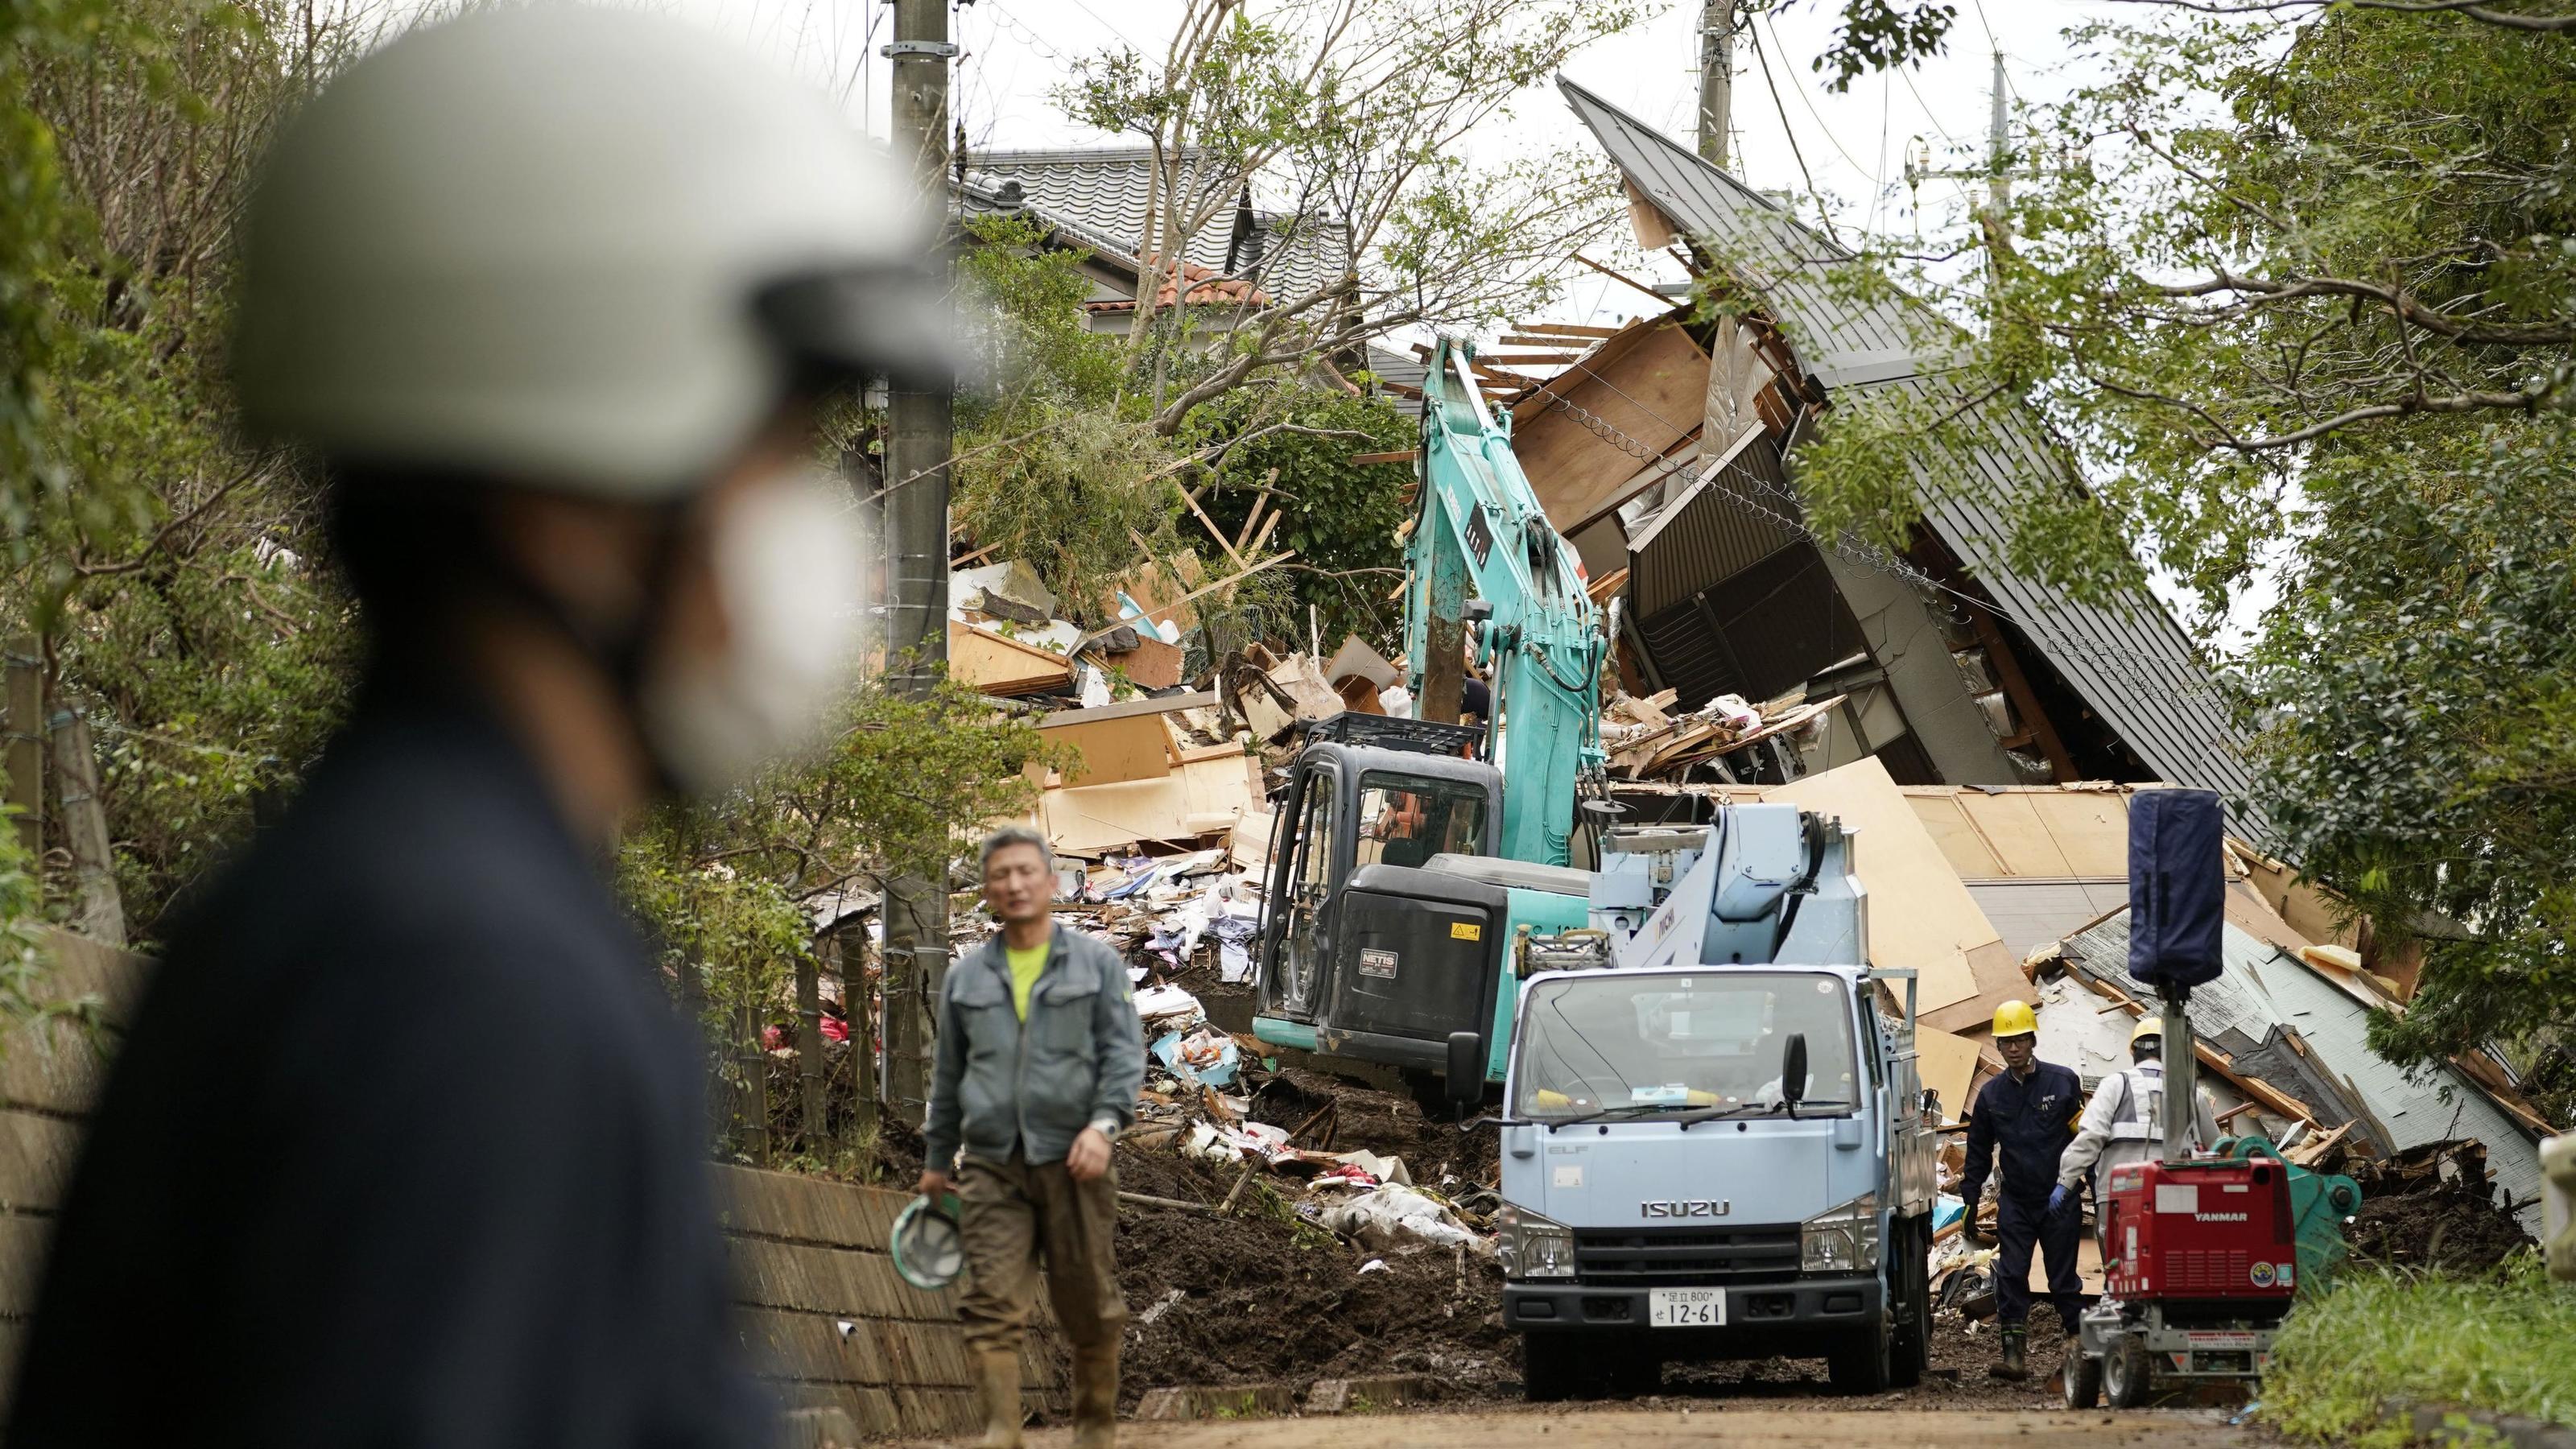 News Bilder des Tages Torrential rain in eastern Japan Photo taken Oct. 26, 2019, shows a house in Chiba, eastern Japan, destroyed by a landslide caused by torrential rain. PUBLICATIONxINxGERxSUIxAUTxHUNxONLY